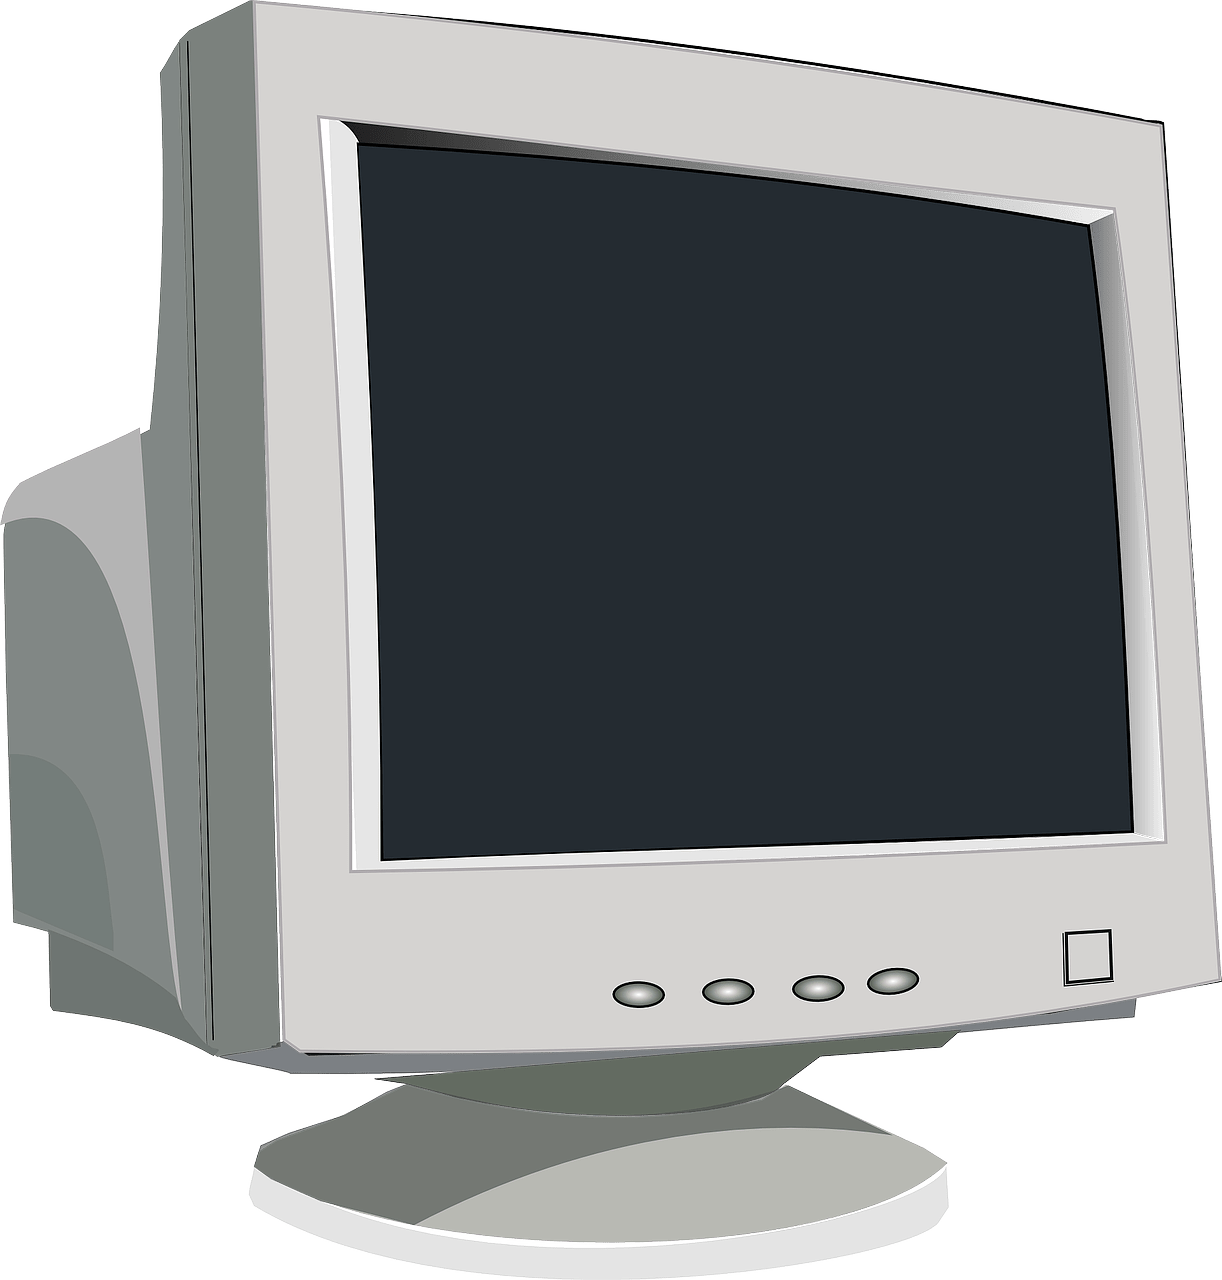 Old monitor